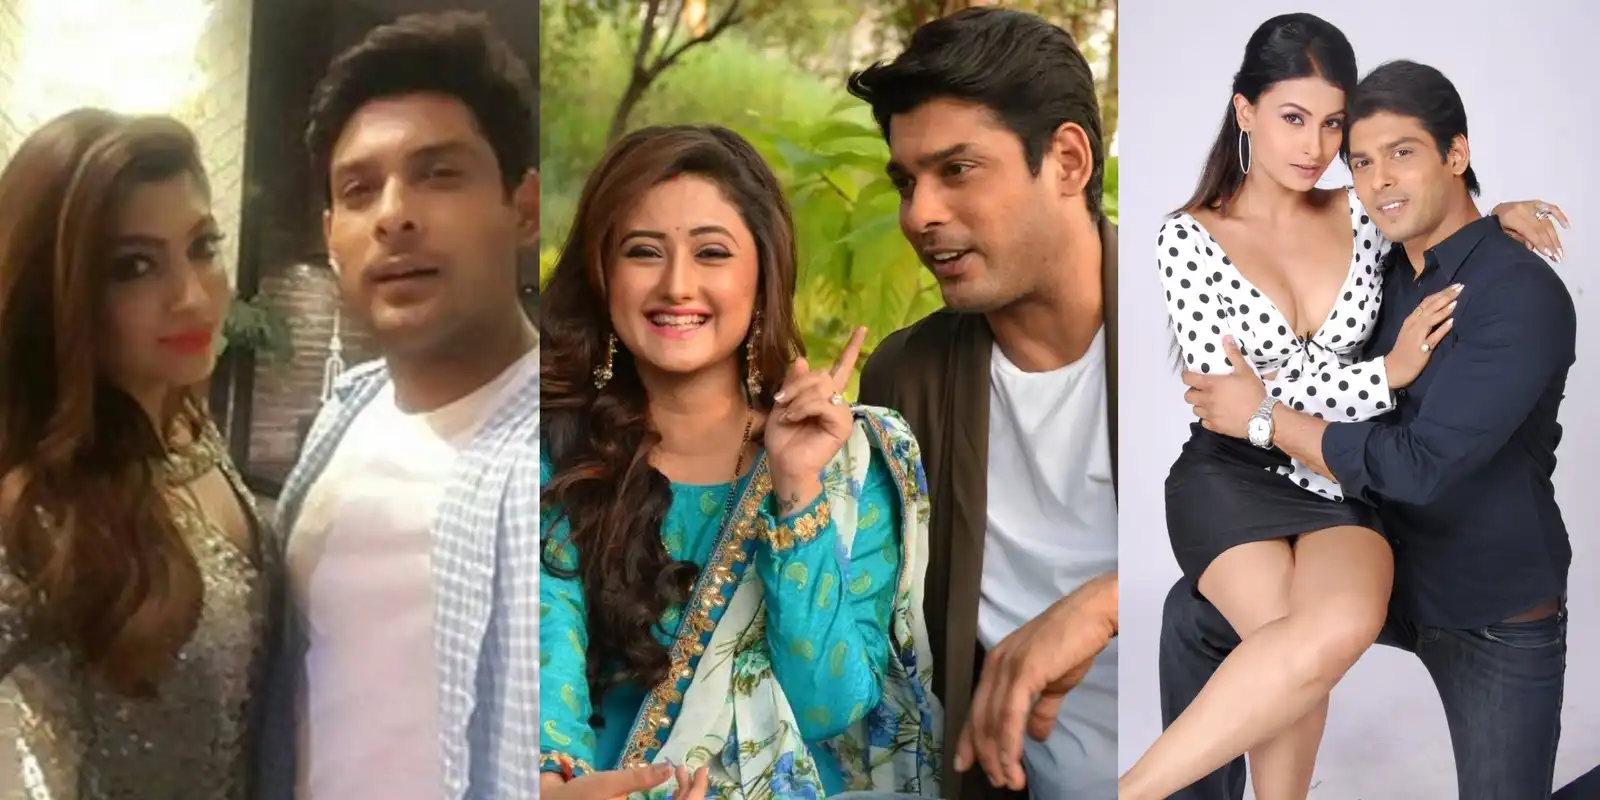 Bigg Boss 13 Contestant Sidharth Shukla Apparently Dated These Actresses, Most Of Them Have A Bigg Boss Connect!